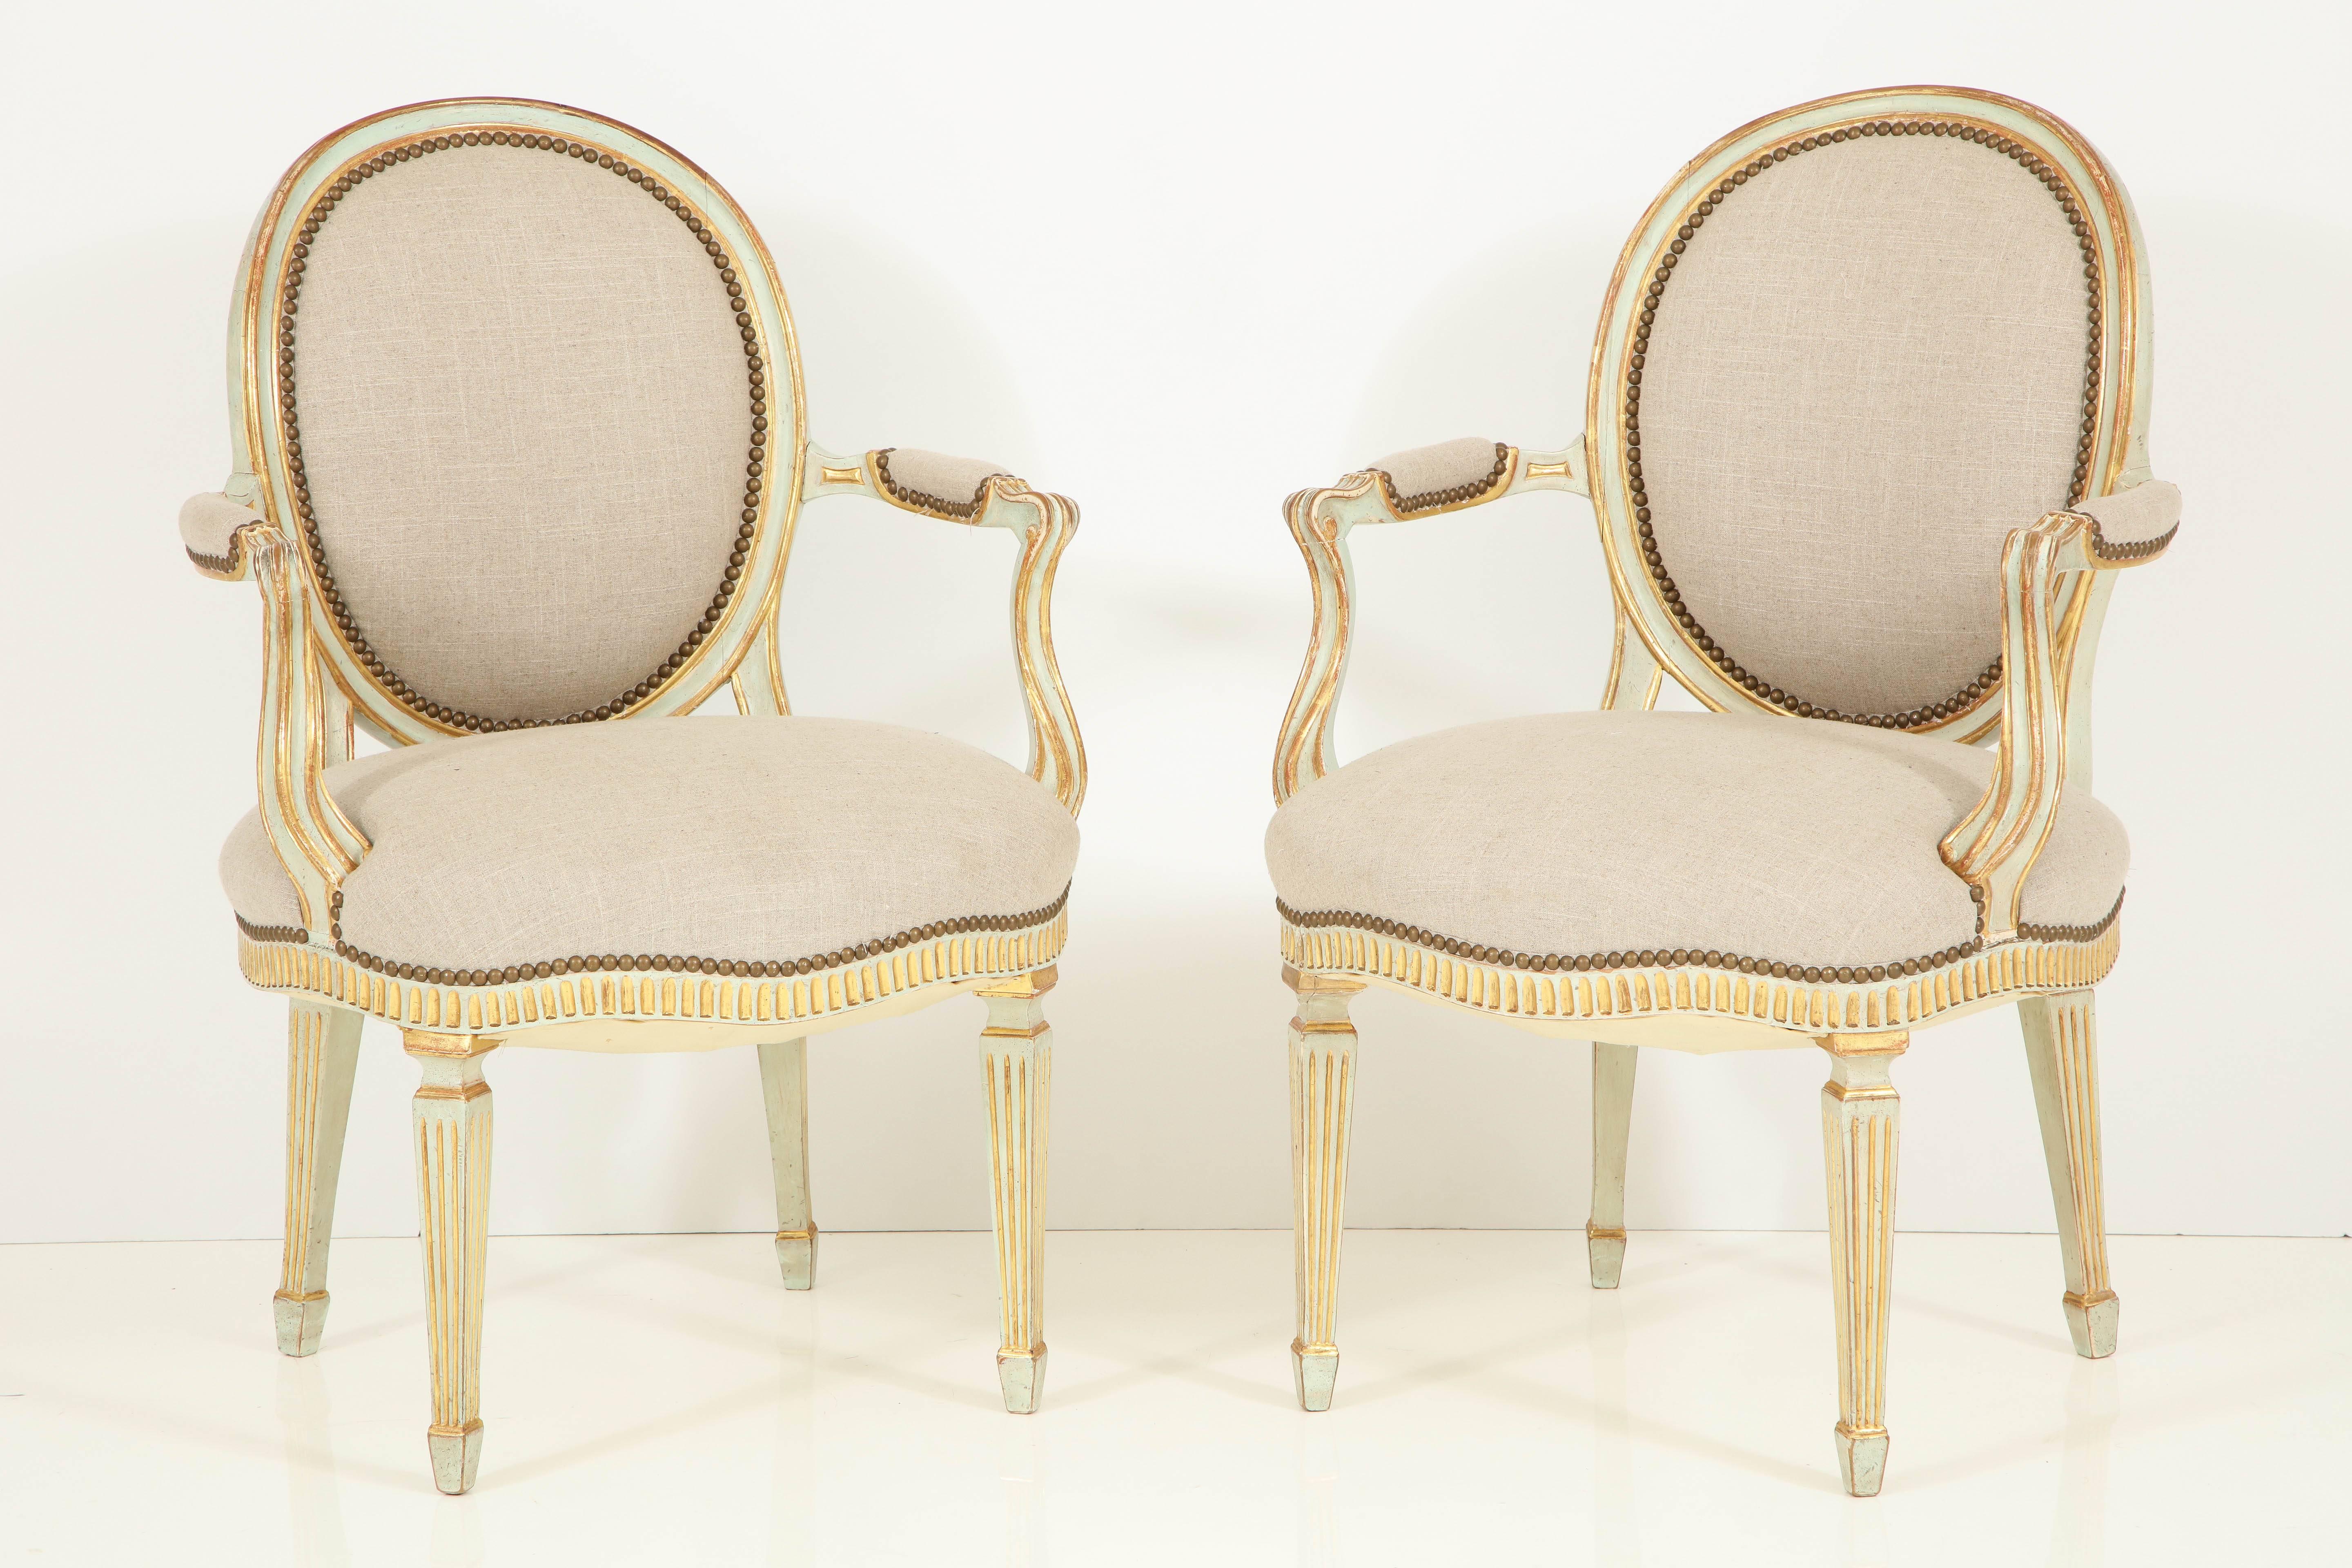 A beautifully crafted pair of Louis XVI Style fauteuils with oval backs, a serpentine front, a fluted apron and fluted, slightly tapered legs. The painted finish is a creamy green with gold leaf accents. The chairs are newly re-upholstered in a